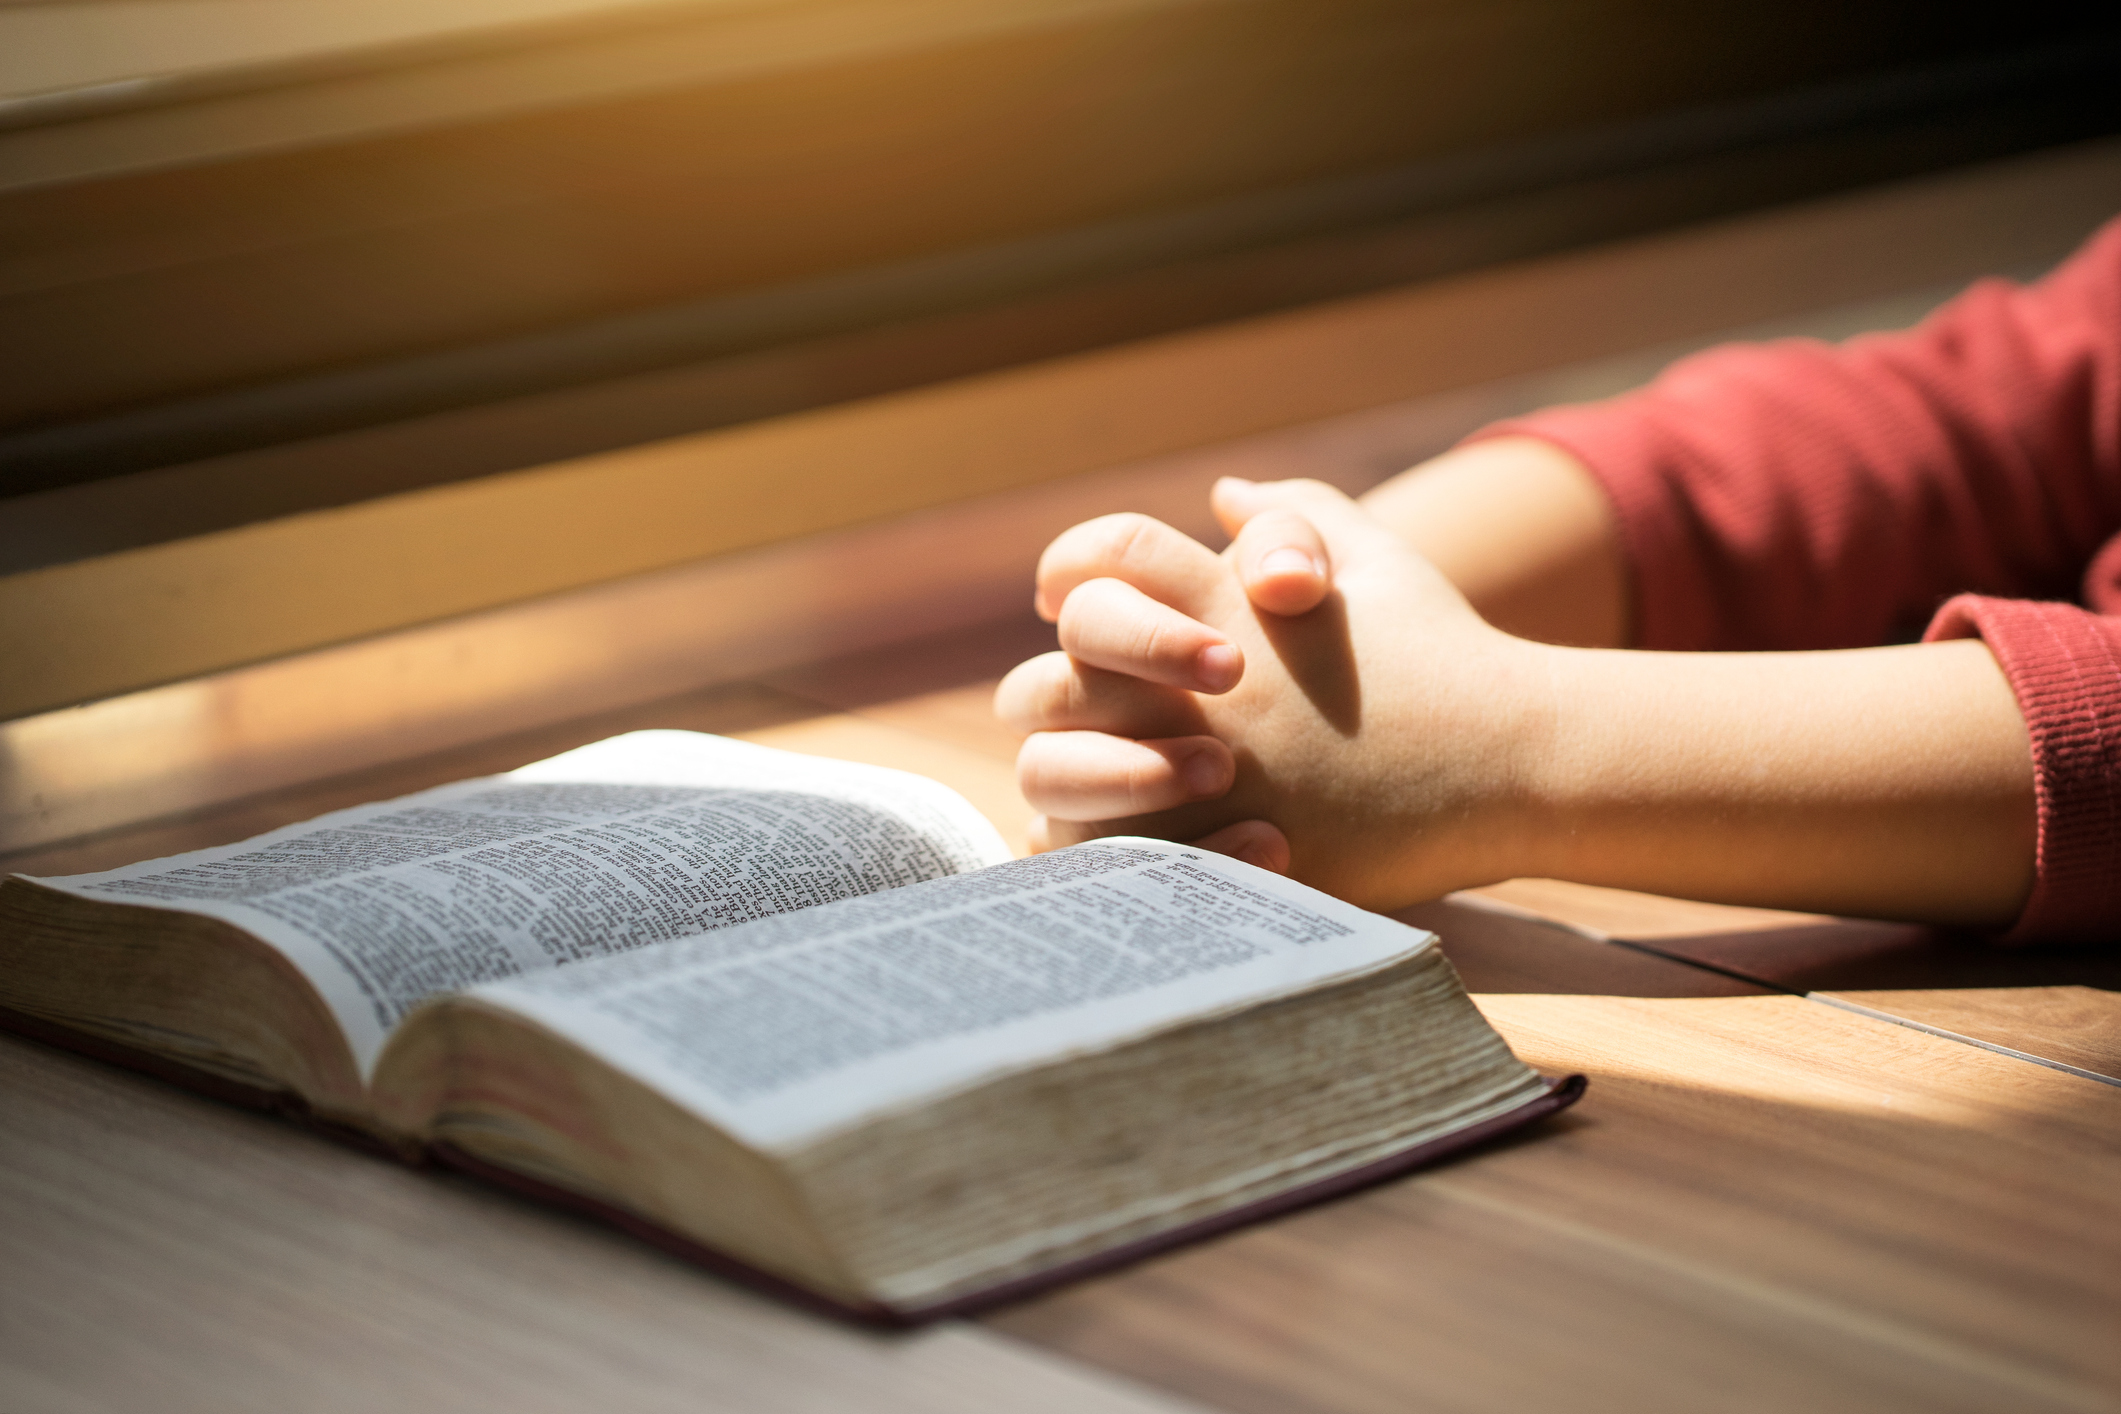 School allegedly refuses 11-year-old’s request for interfaith prayer group while approving LGBT group